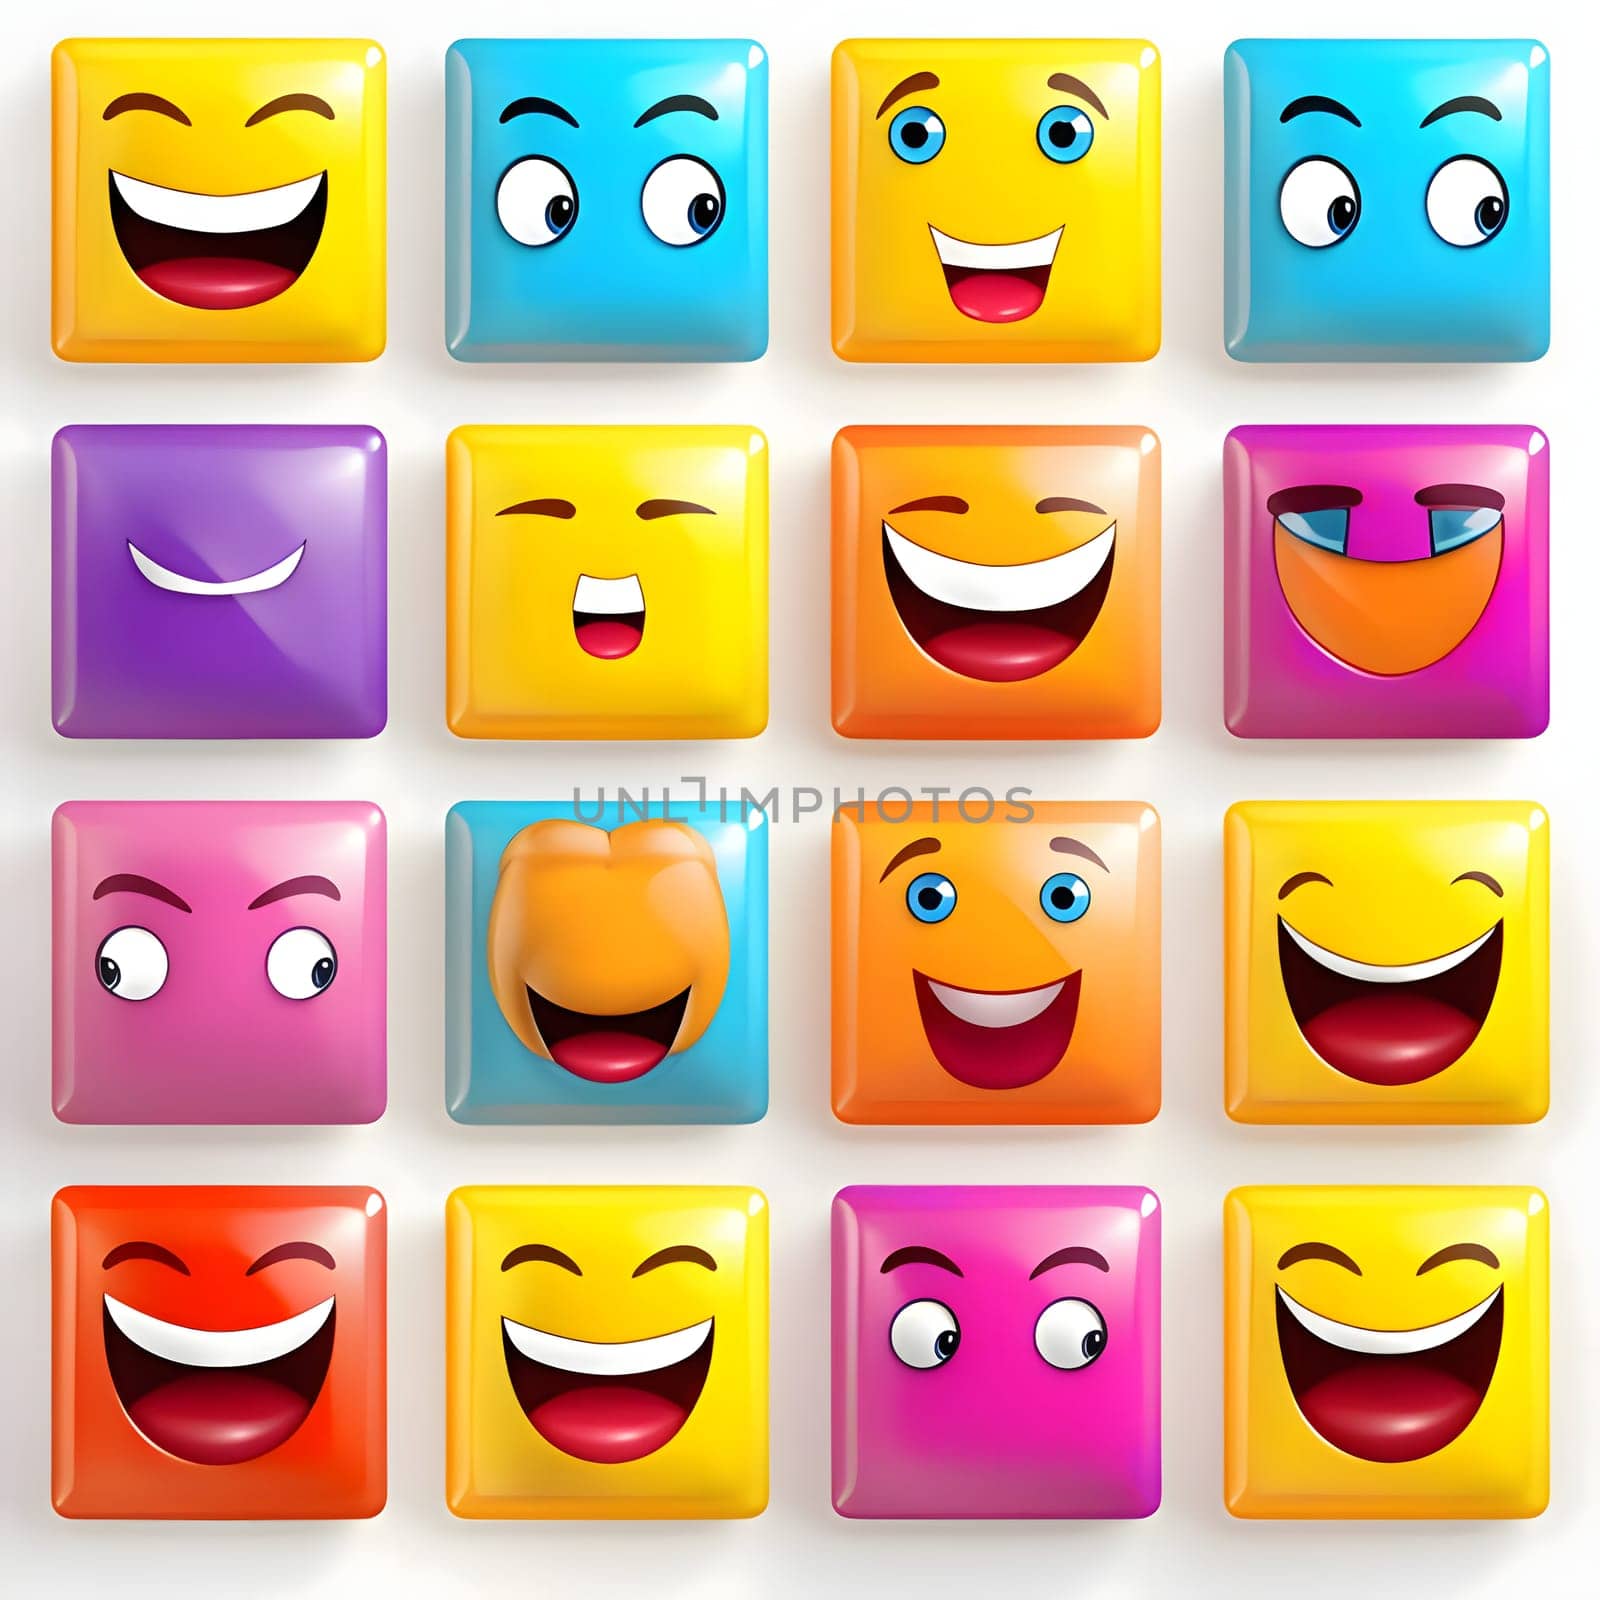 Patterns and banners backgrounds: Cartoon square emoticons with different facial expressions. Vector illustration.